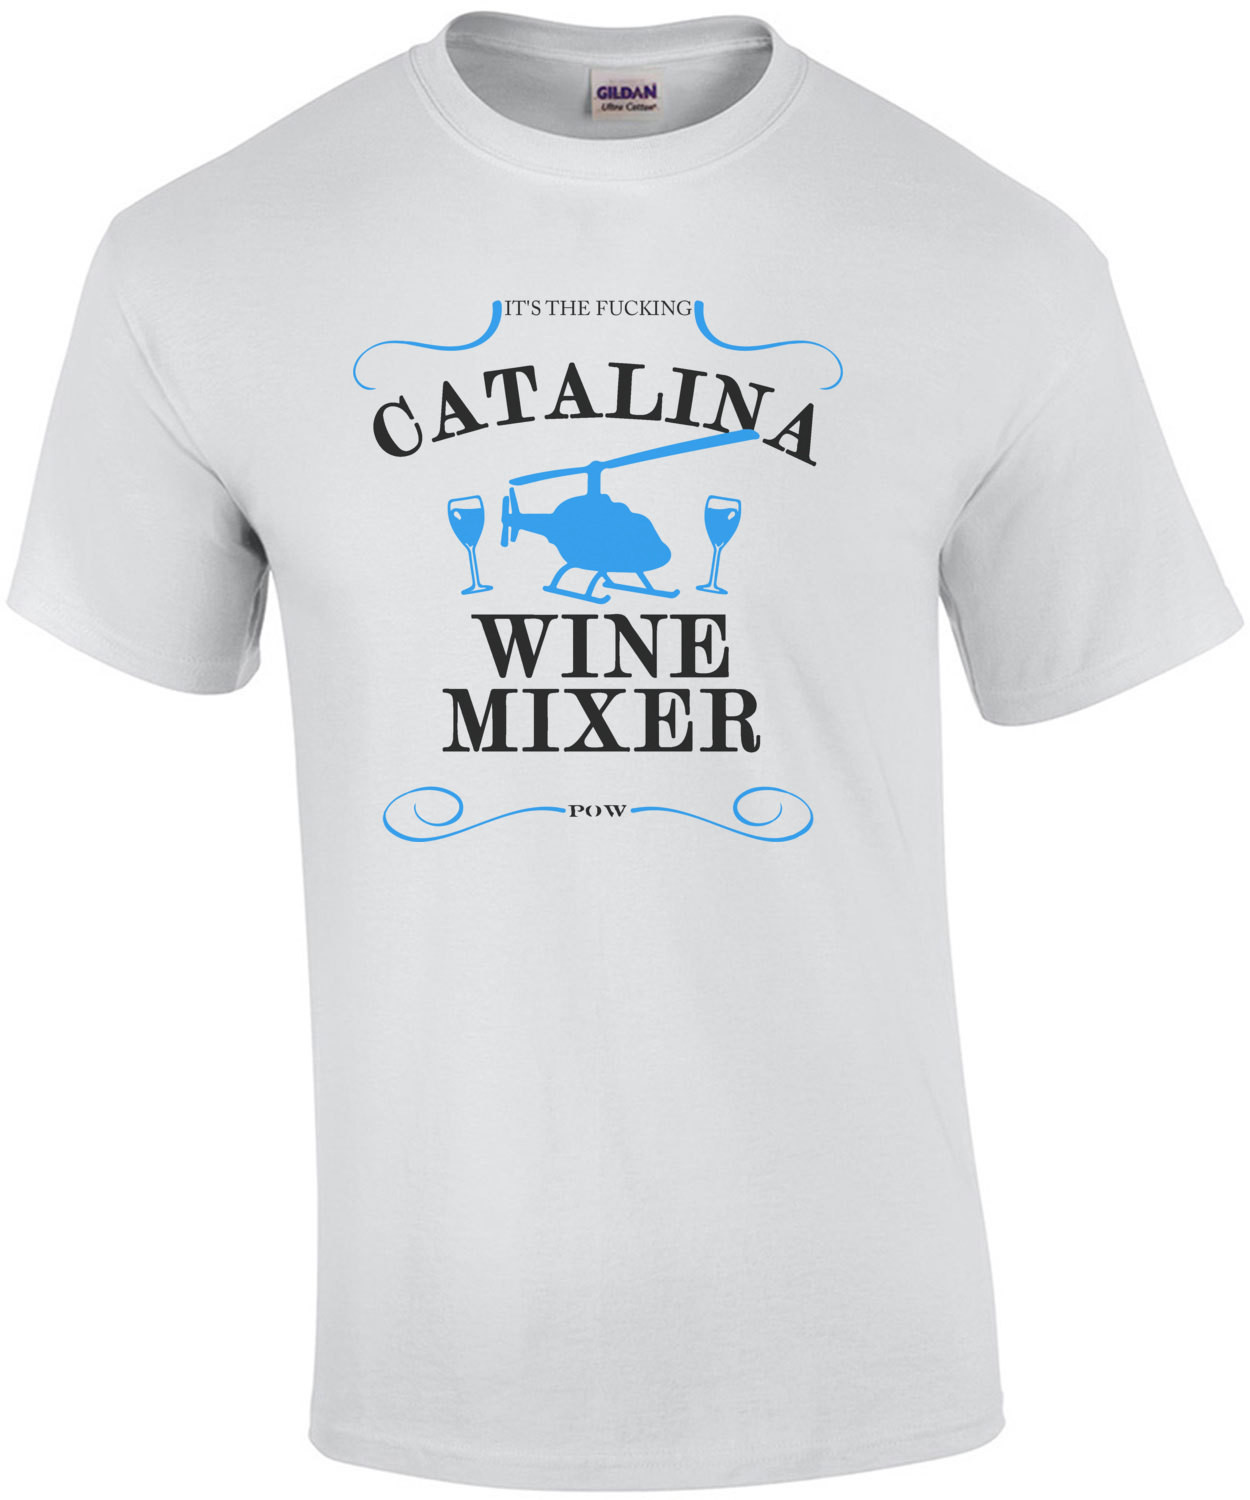 It's The Fucking Catalina Wine Mixer - Step Brothers T-Shirt 